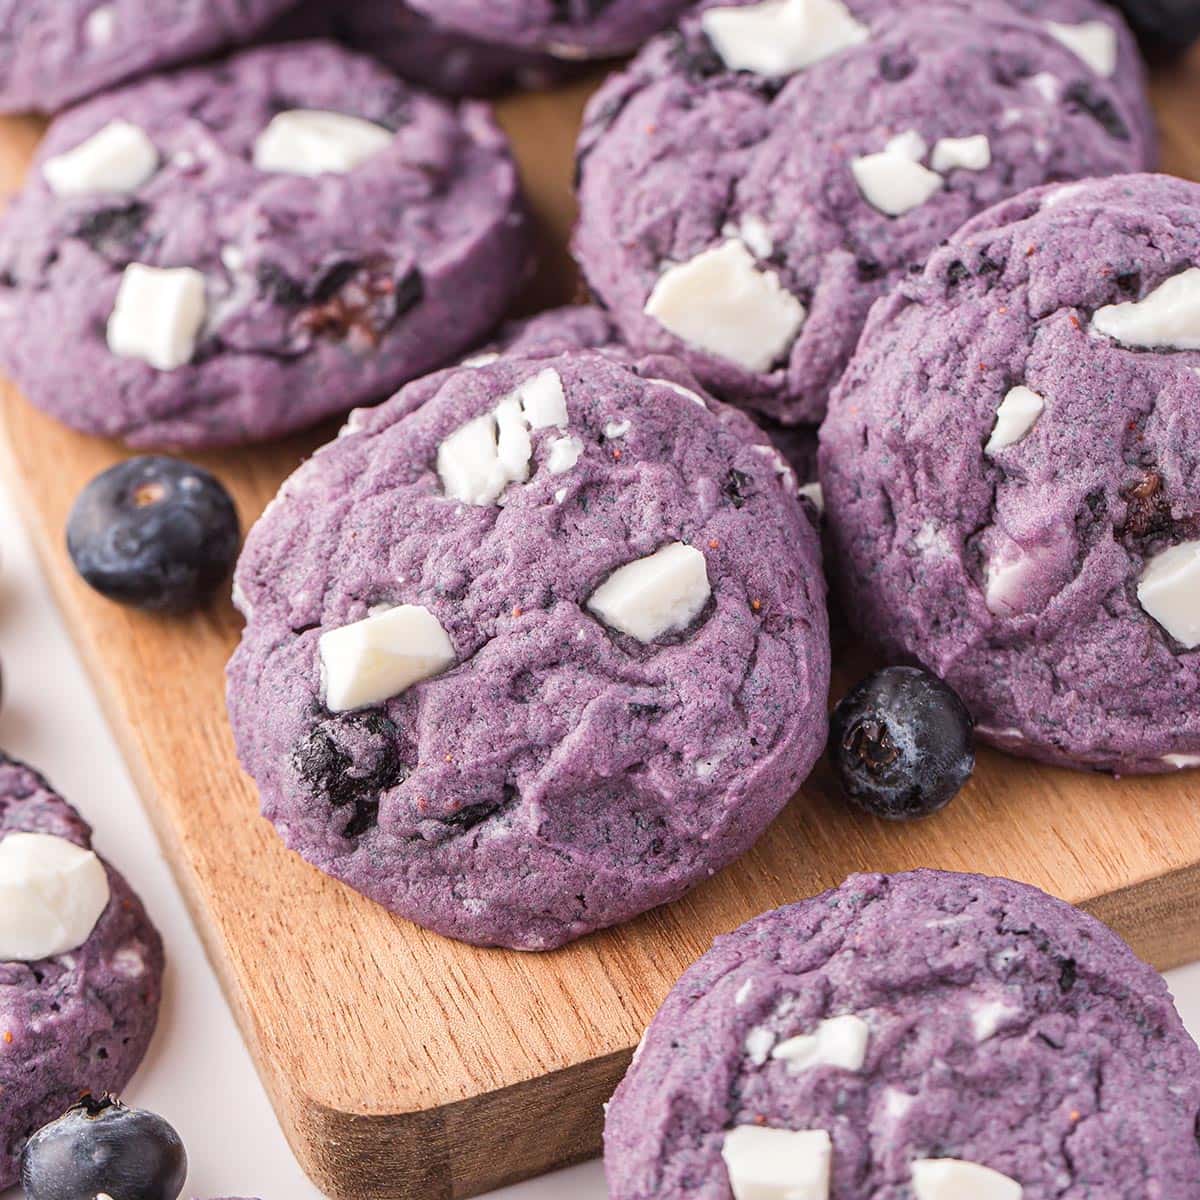 https://princesspinkygirl.com/wp-content/uploads/2021/11/Blueberry-Cookies-19square1200.jpg